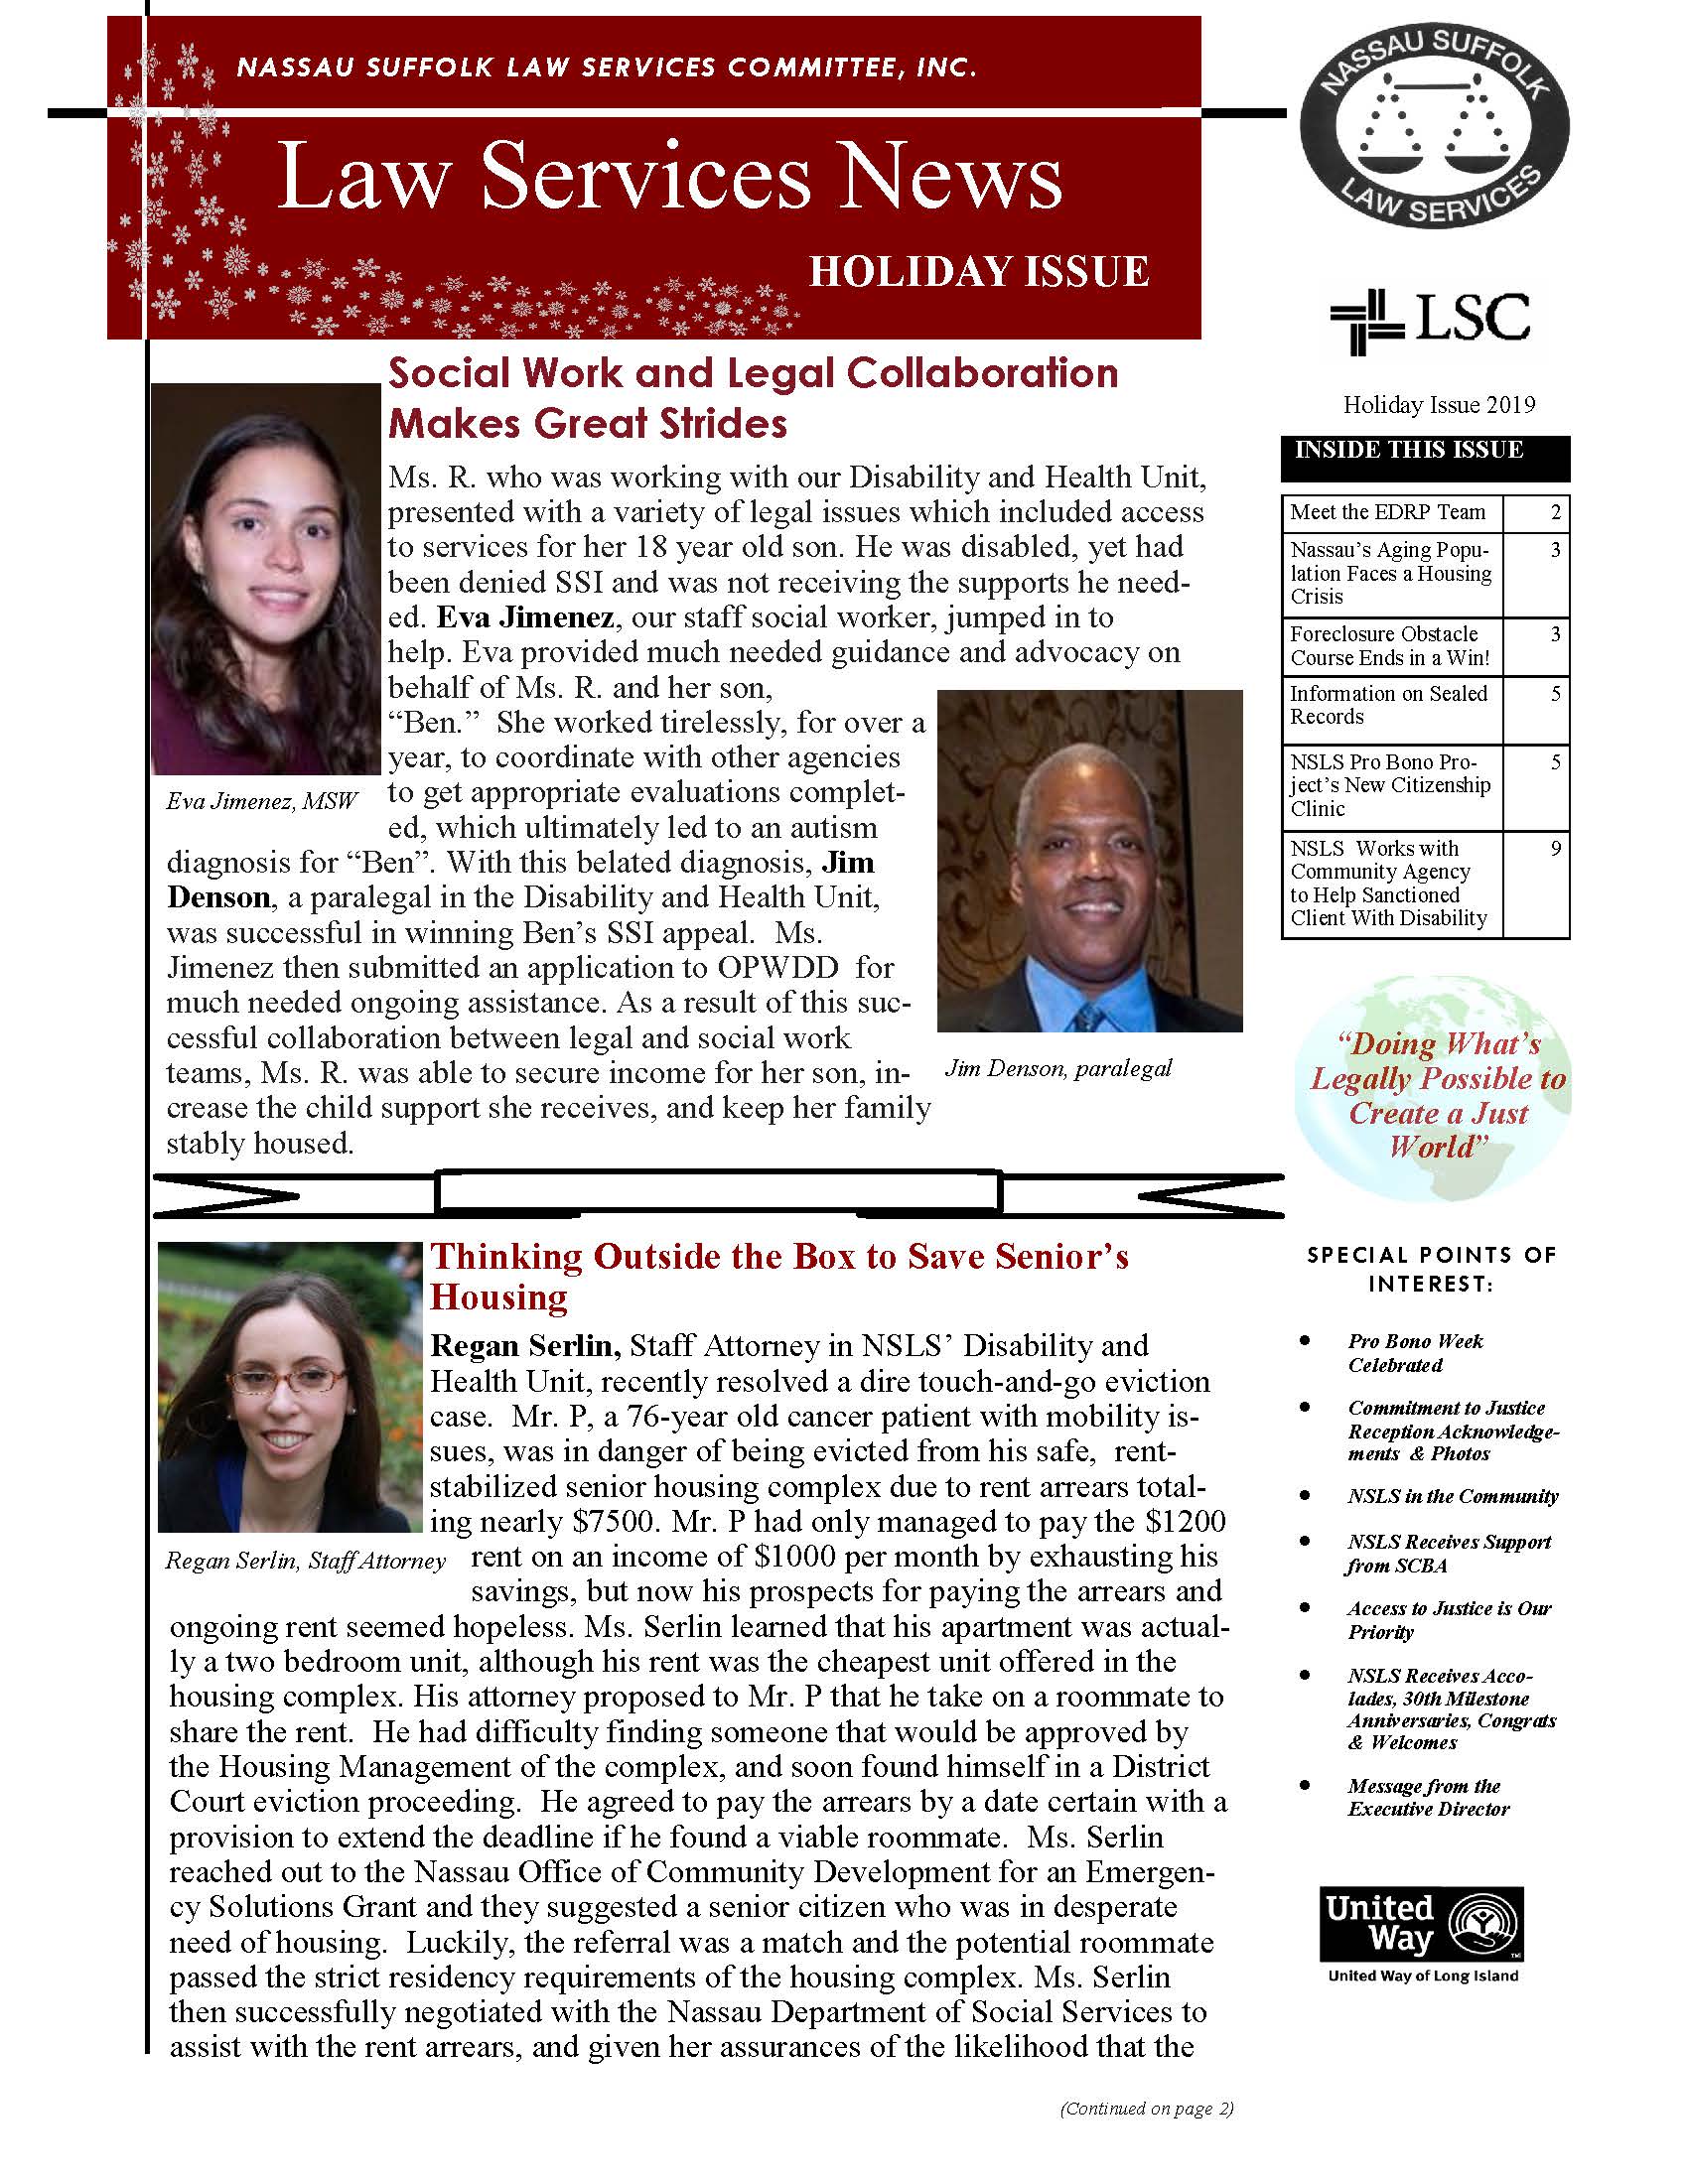 Law Services News – Holiday 2019